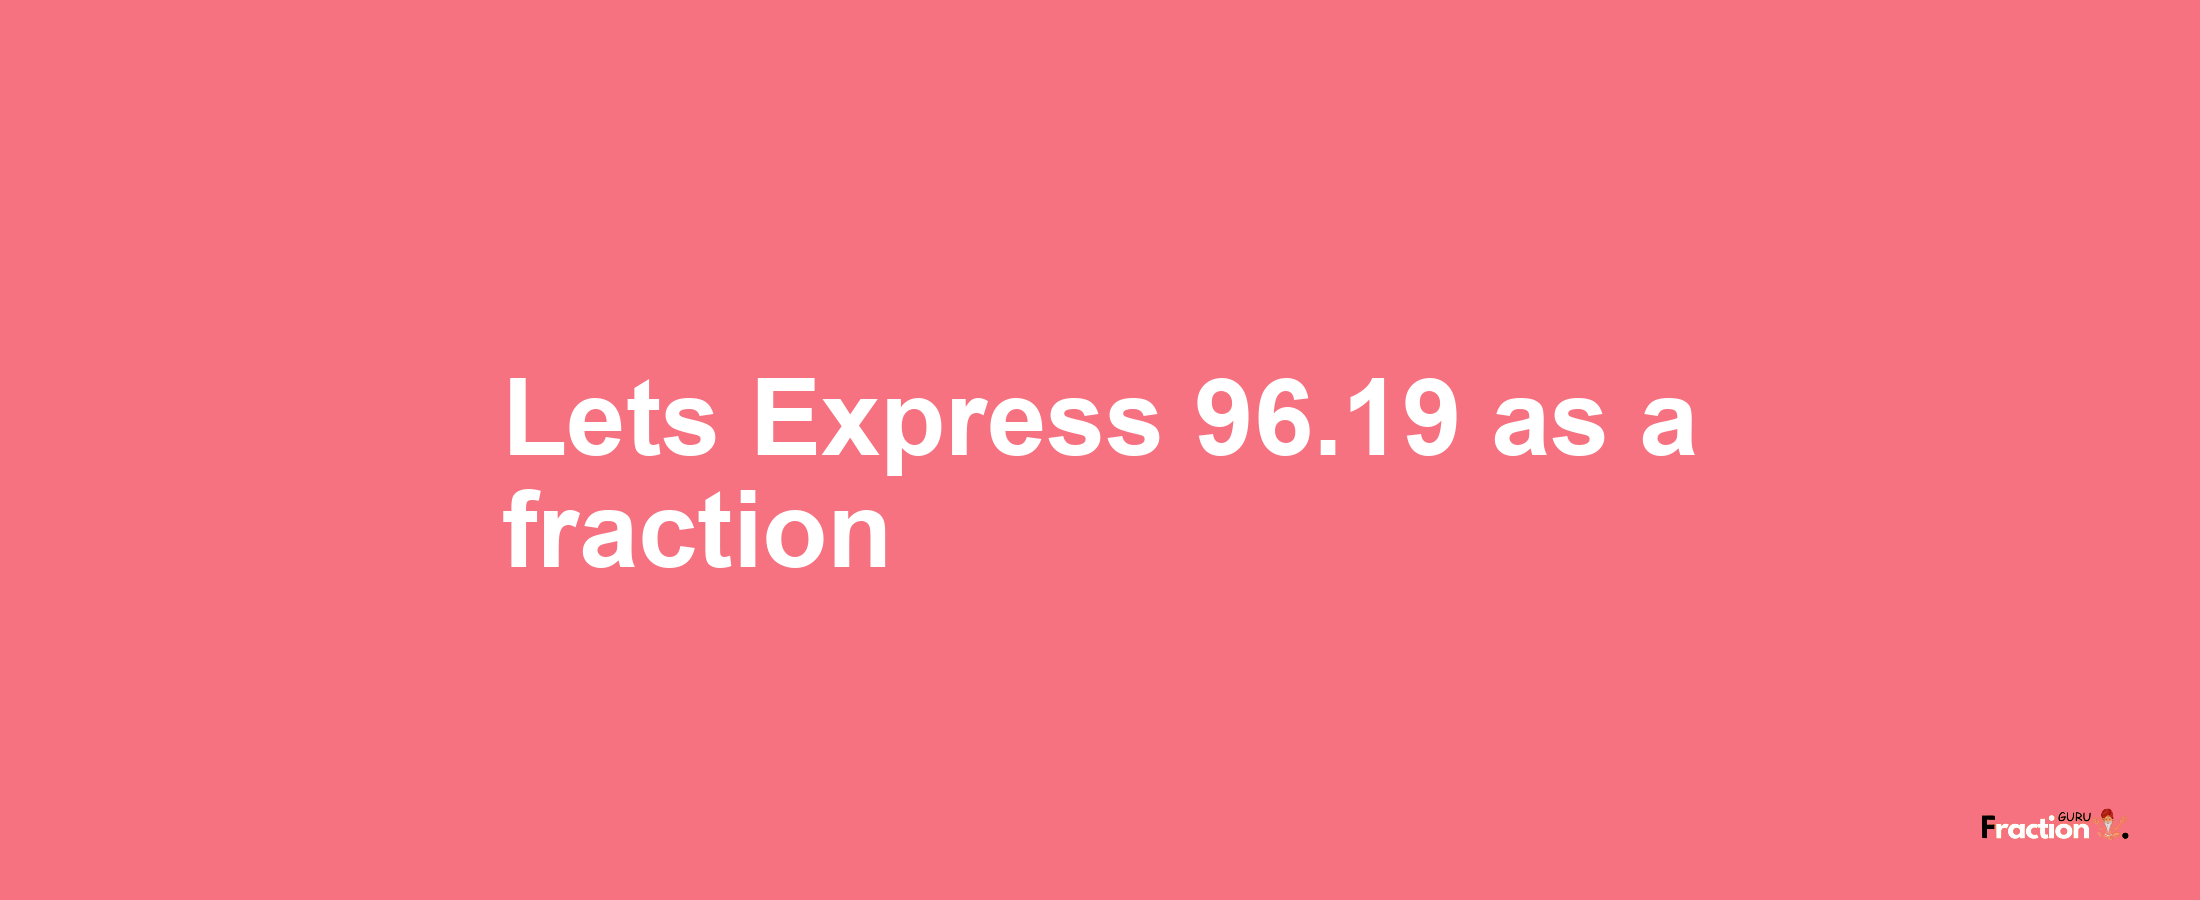 Lets Express 96.19 as afraction